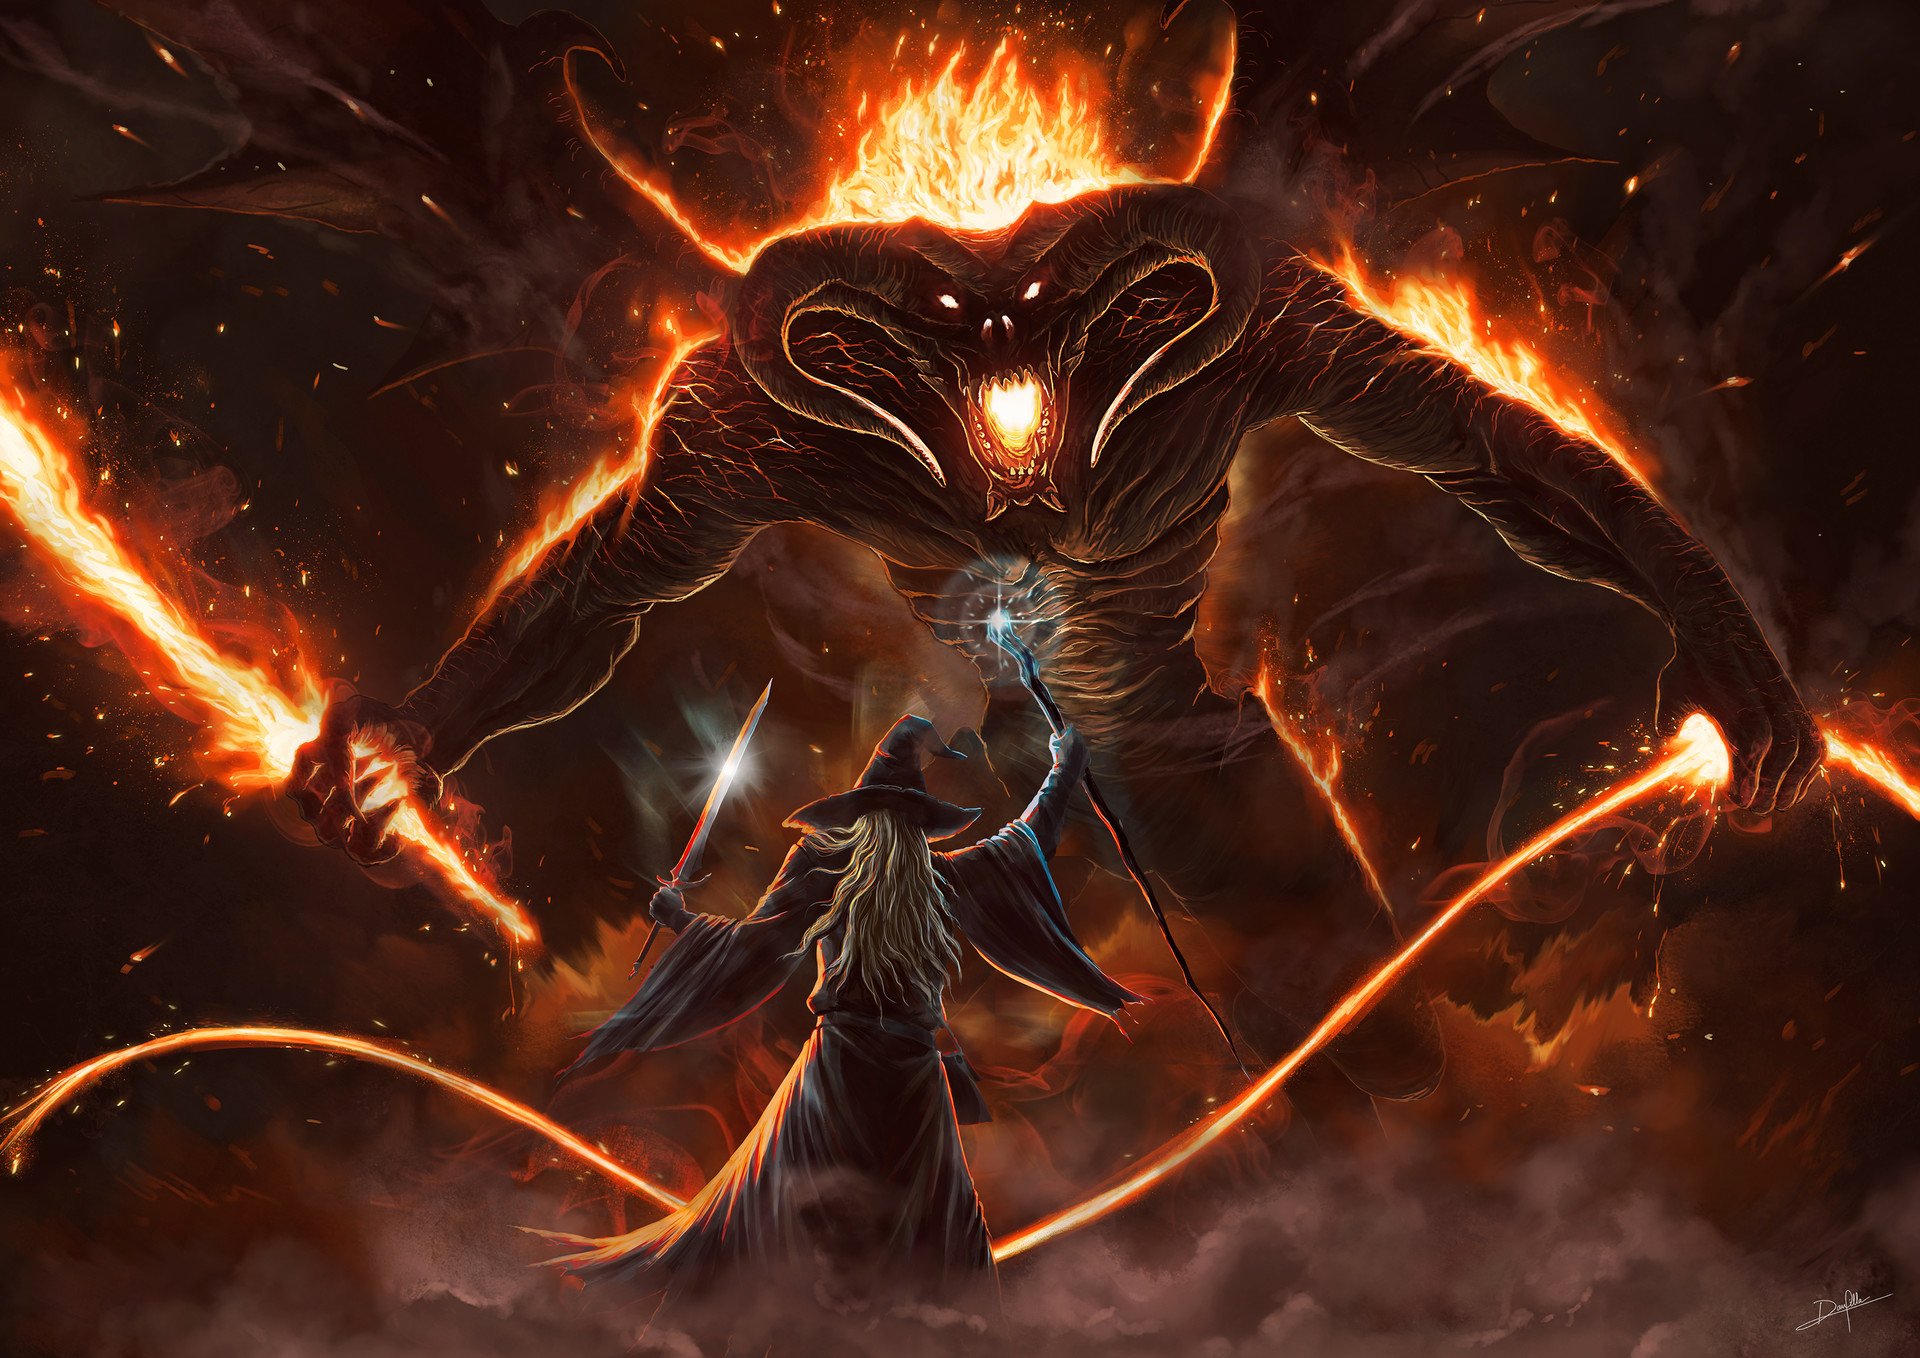 General 1920x1358 The Lord of the Rings Gandalf Balrog fantasy art artwork fire sword whips